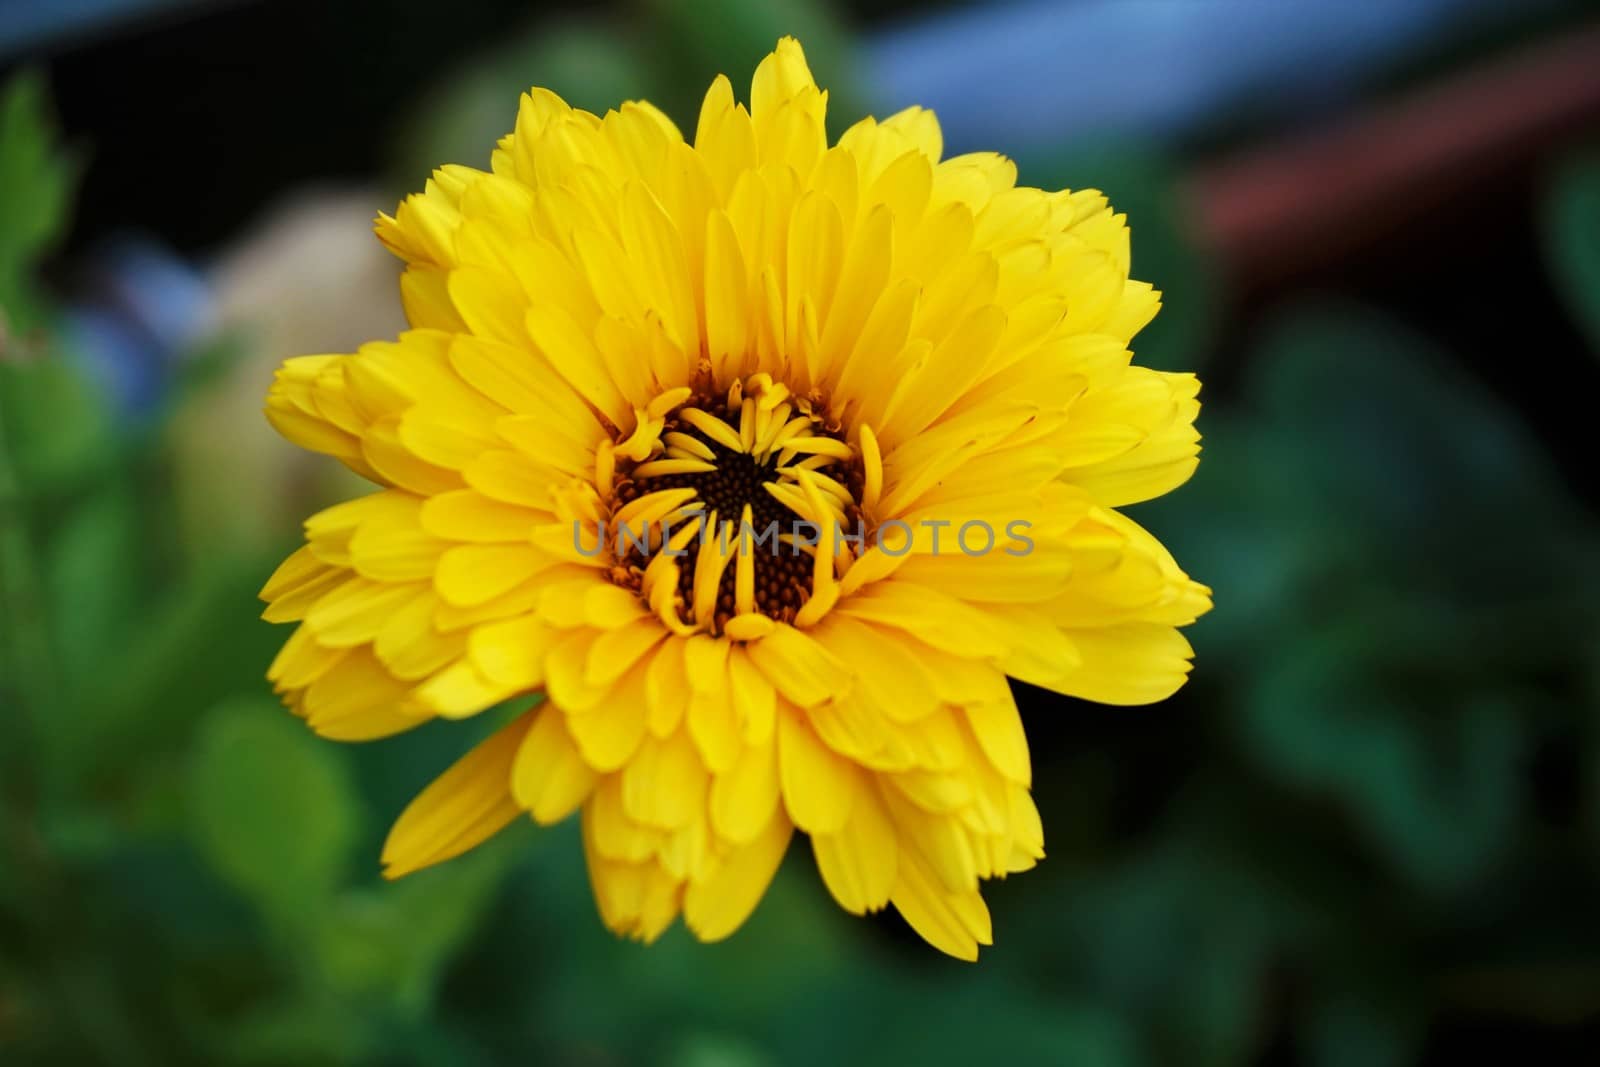 A yellow Calendula officinalis blossom in the garden by pisces2386